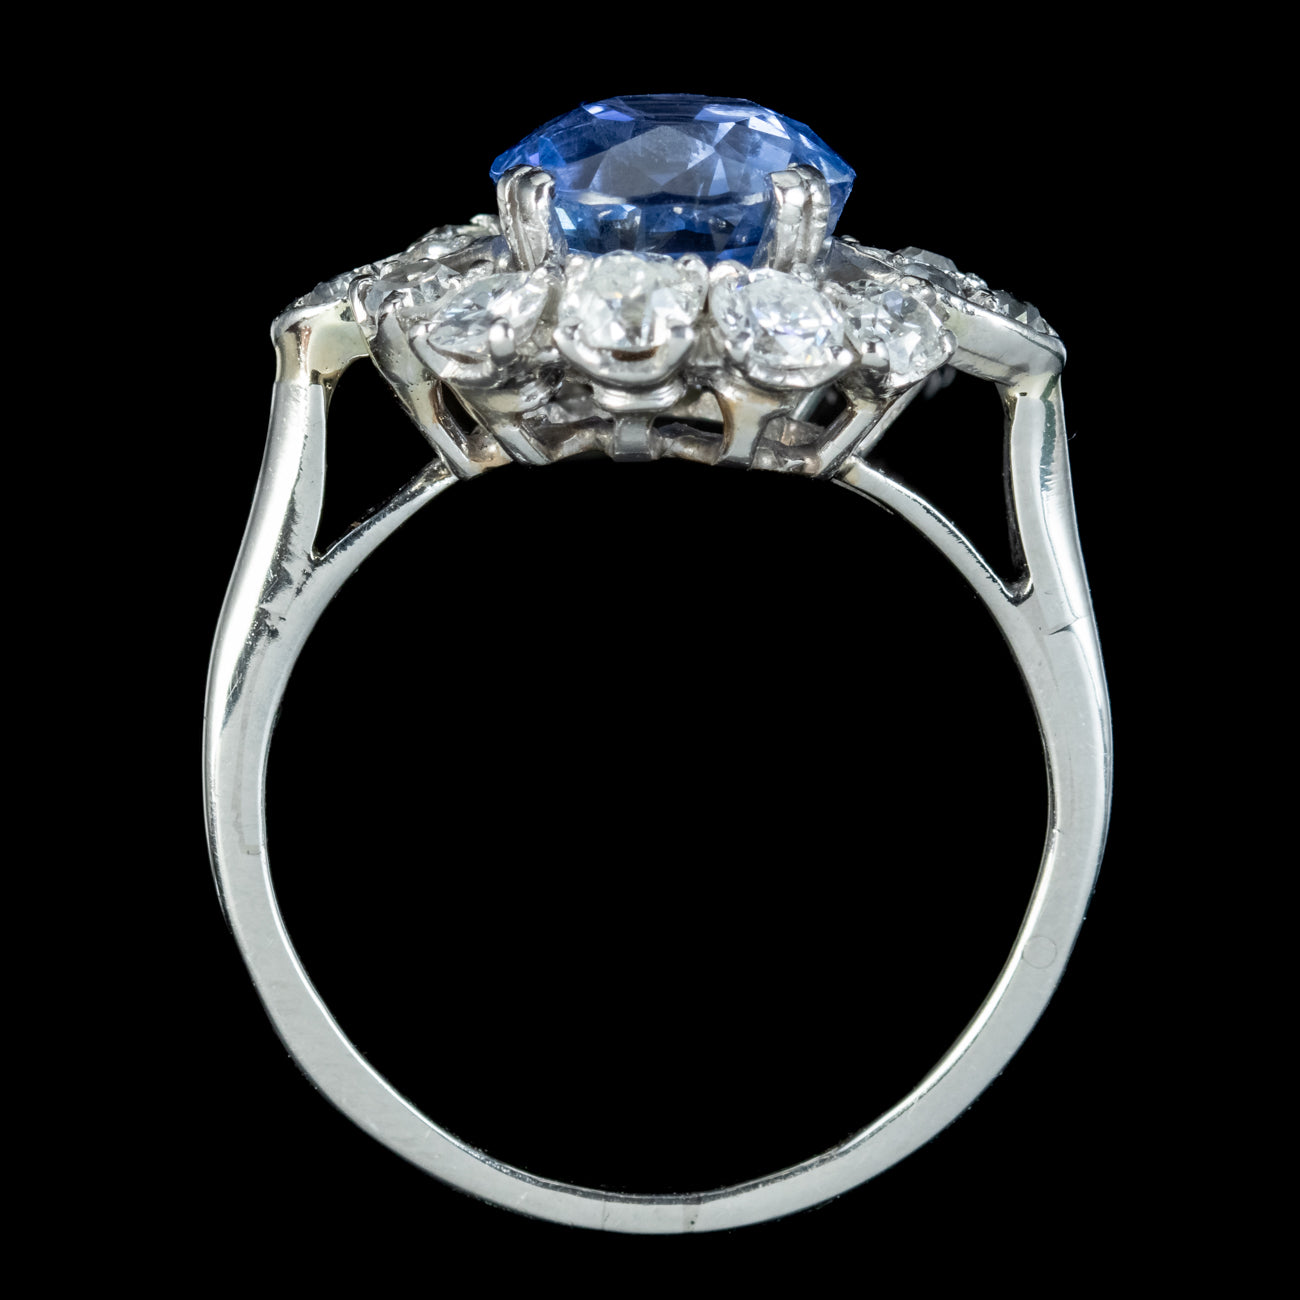 Vintage Sapphire Diamond Cluster Ring 3.30ct Sapphire With Cert Top ?v=1643362729